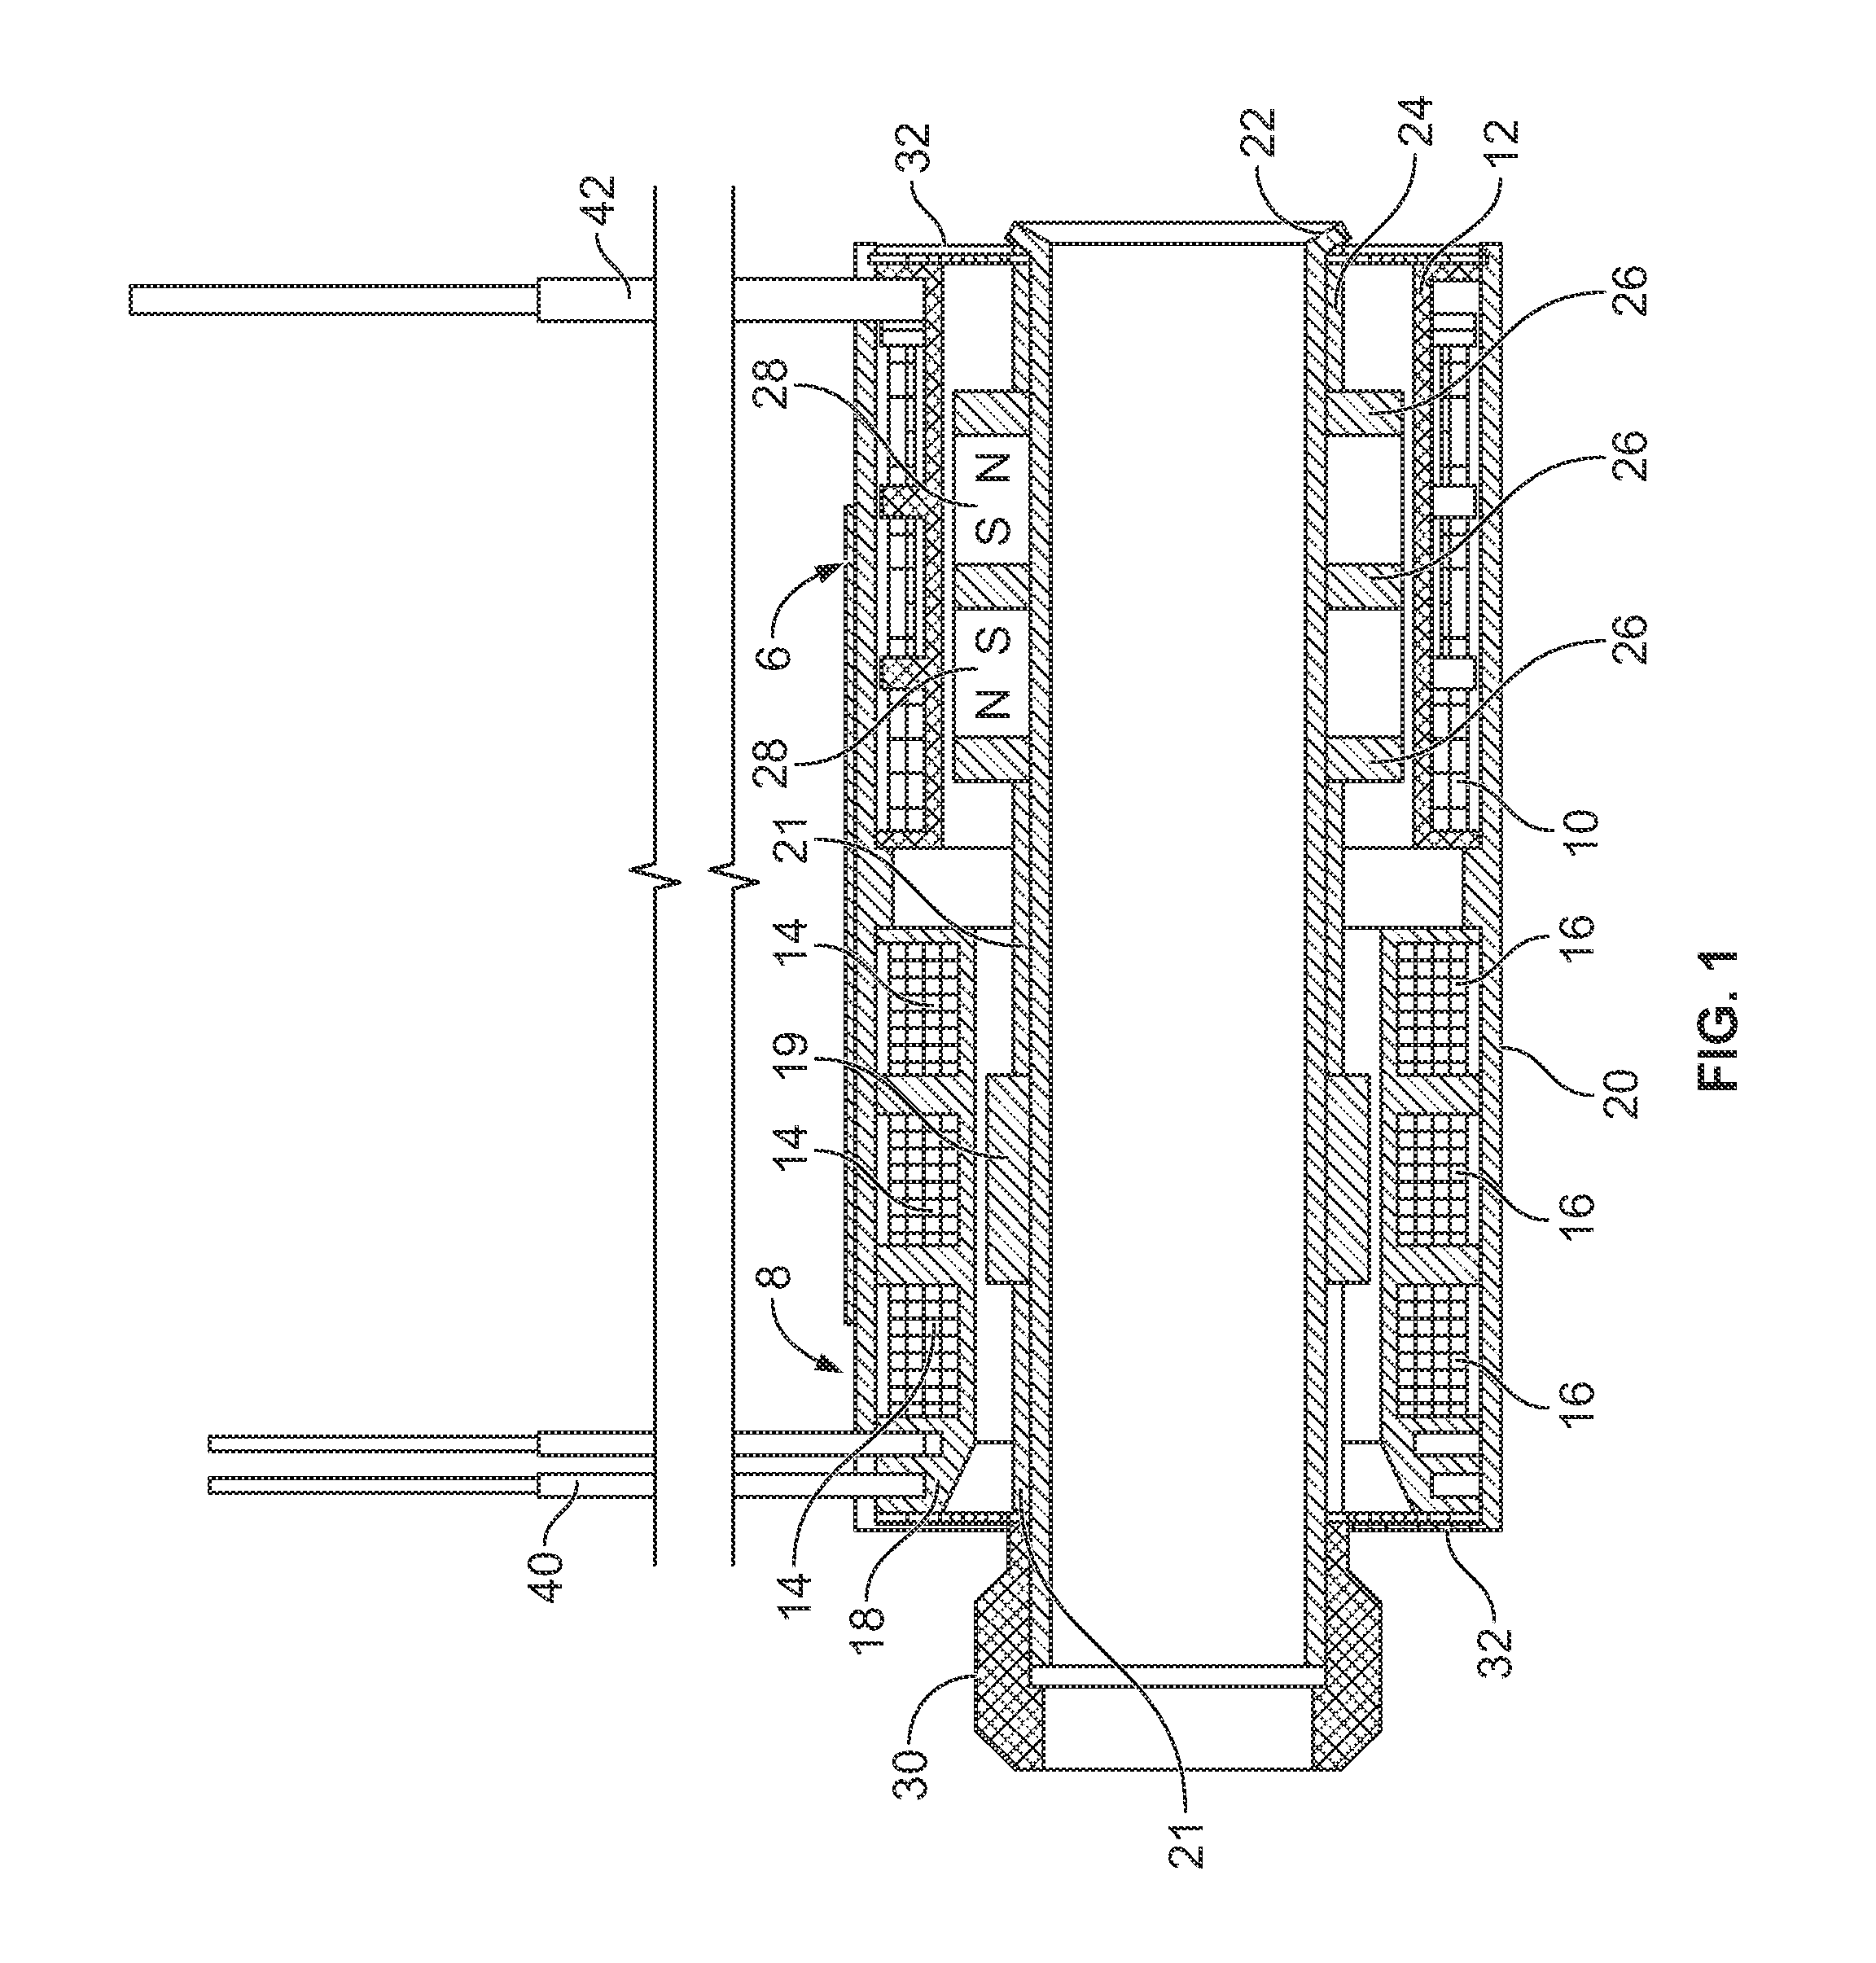 Voice Coil Actuator with Integrated LVDT